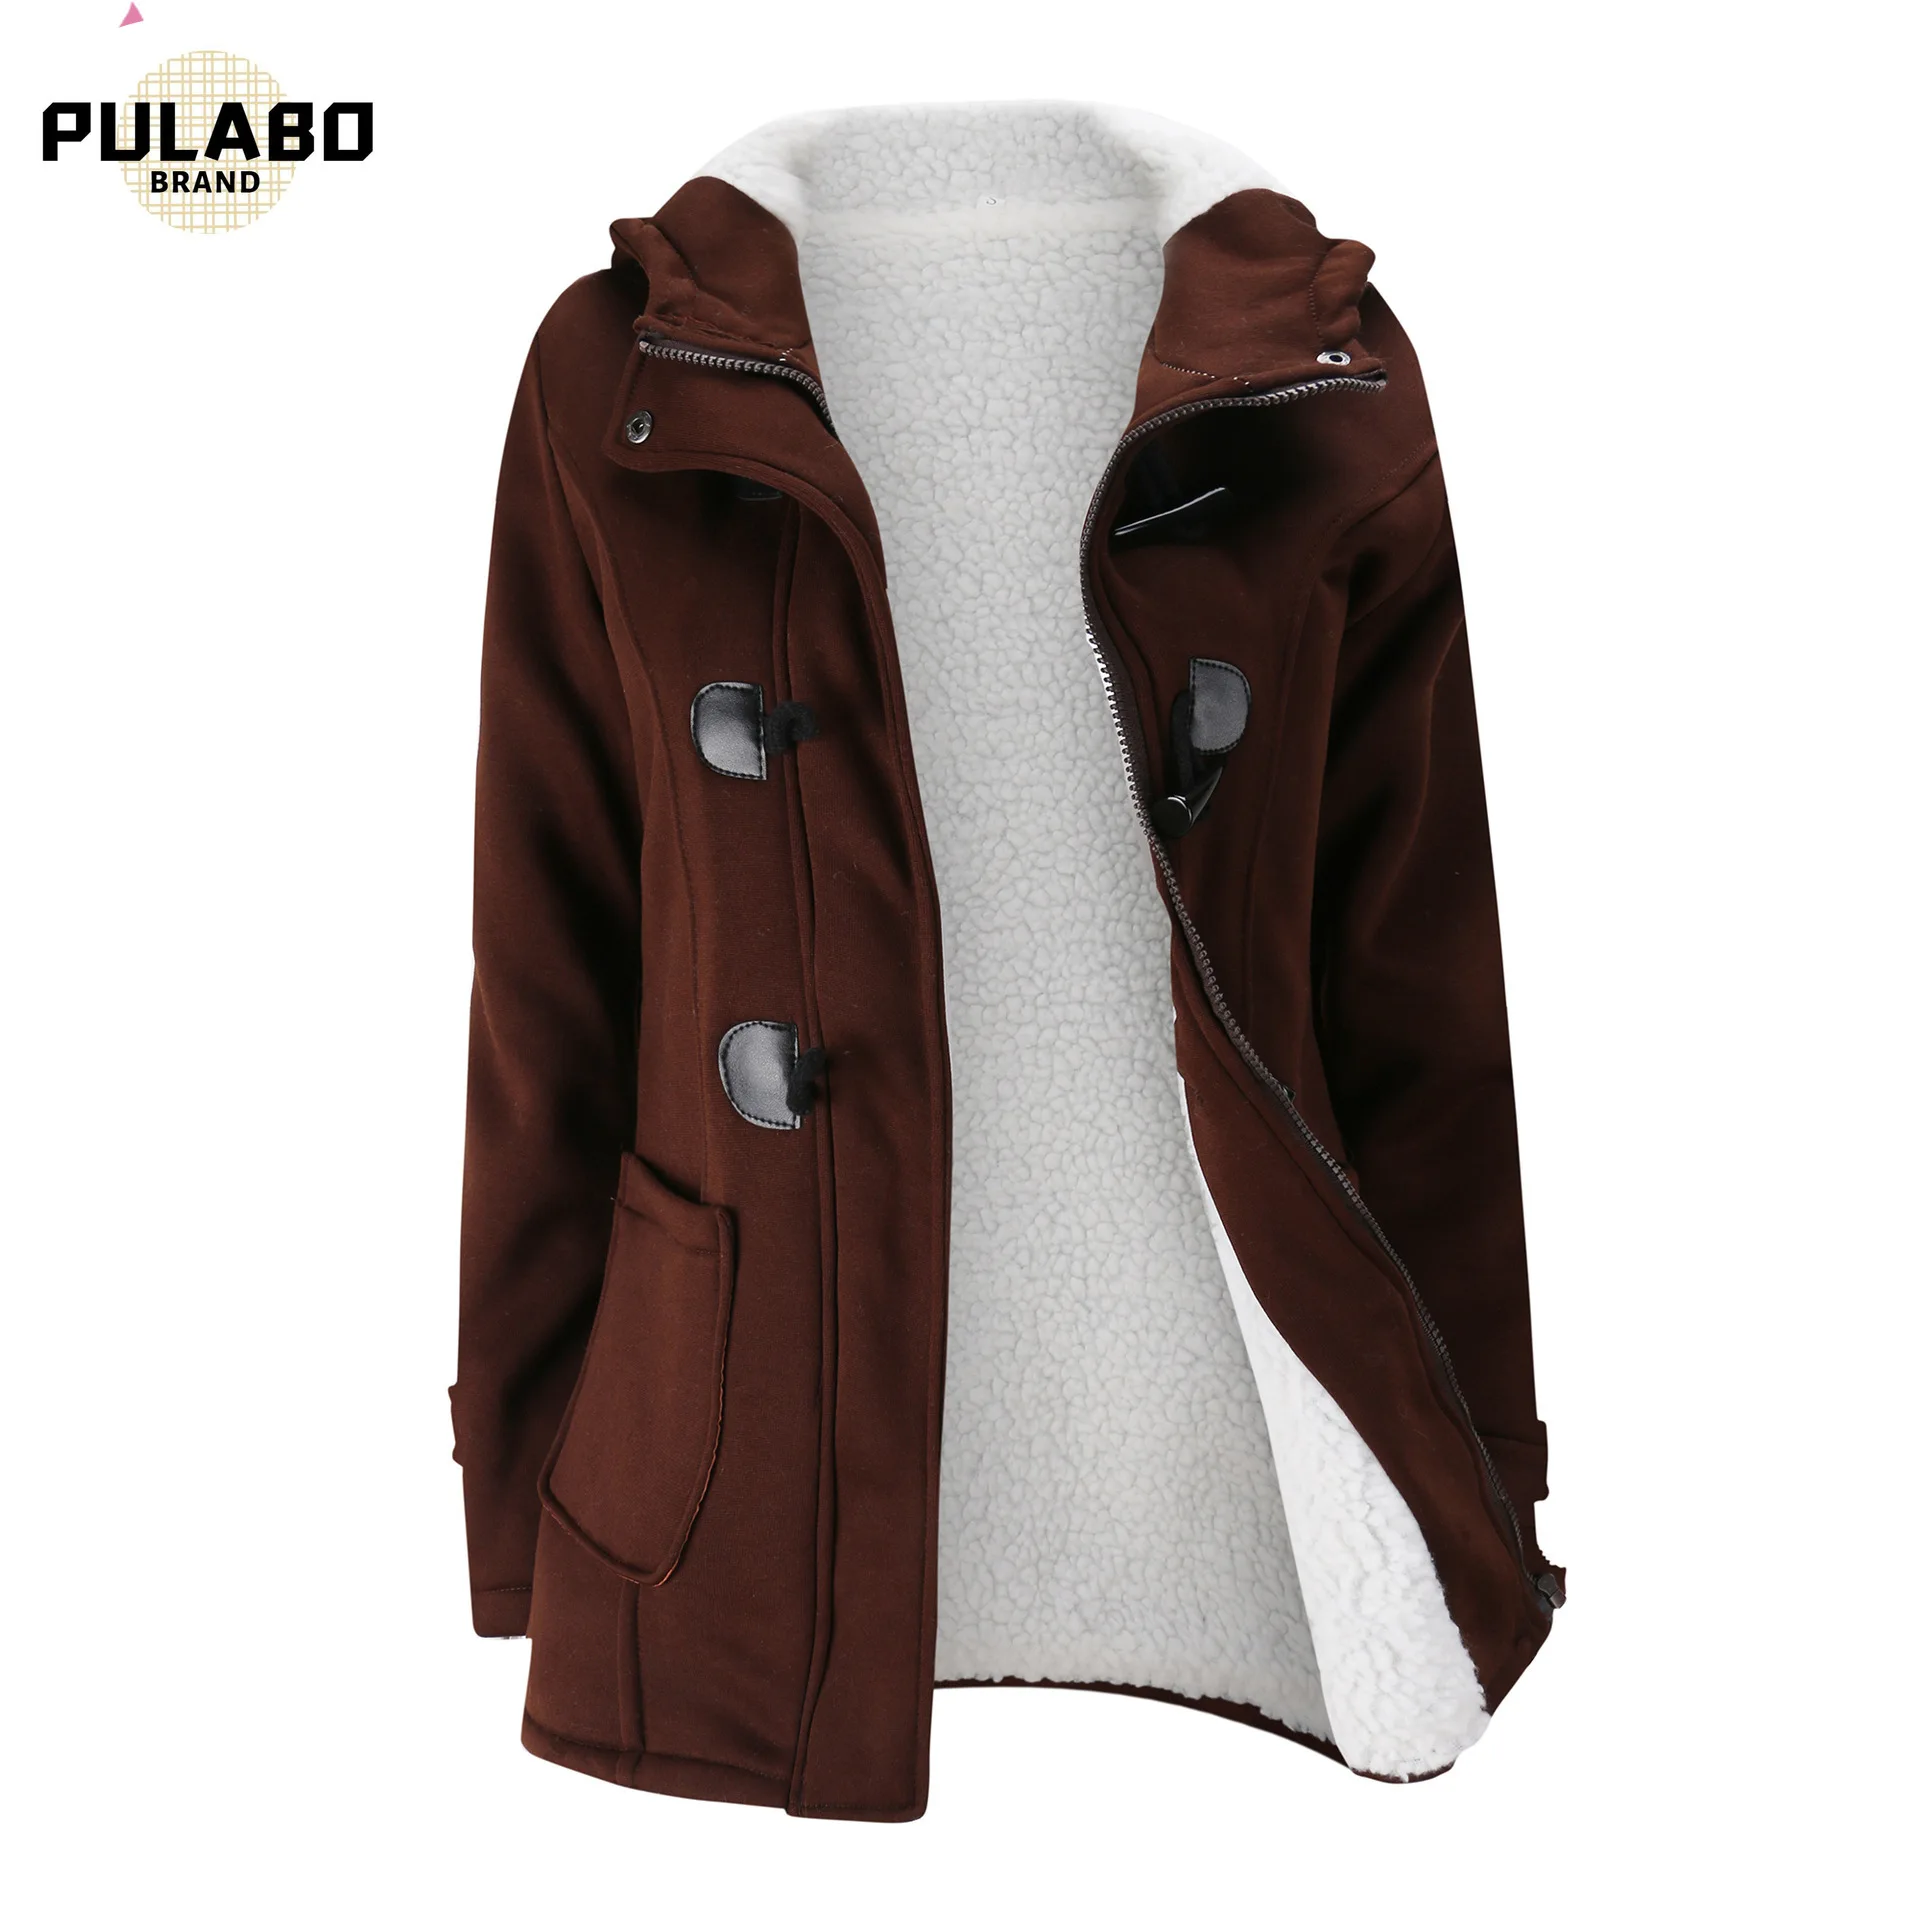 

Womens Winter Fashion Outdoor Warm Wool Blended Pea Coat Hooded Horn Buckle Thickening Cotton-padded Clothes Lambs Jacket